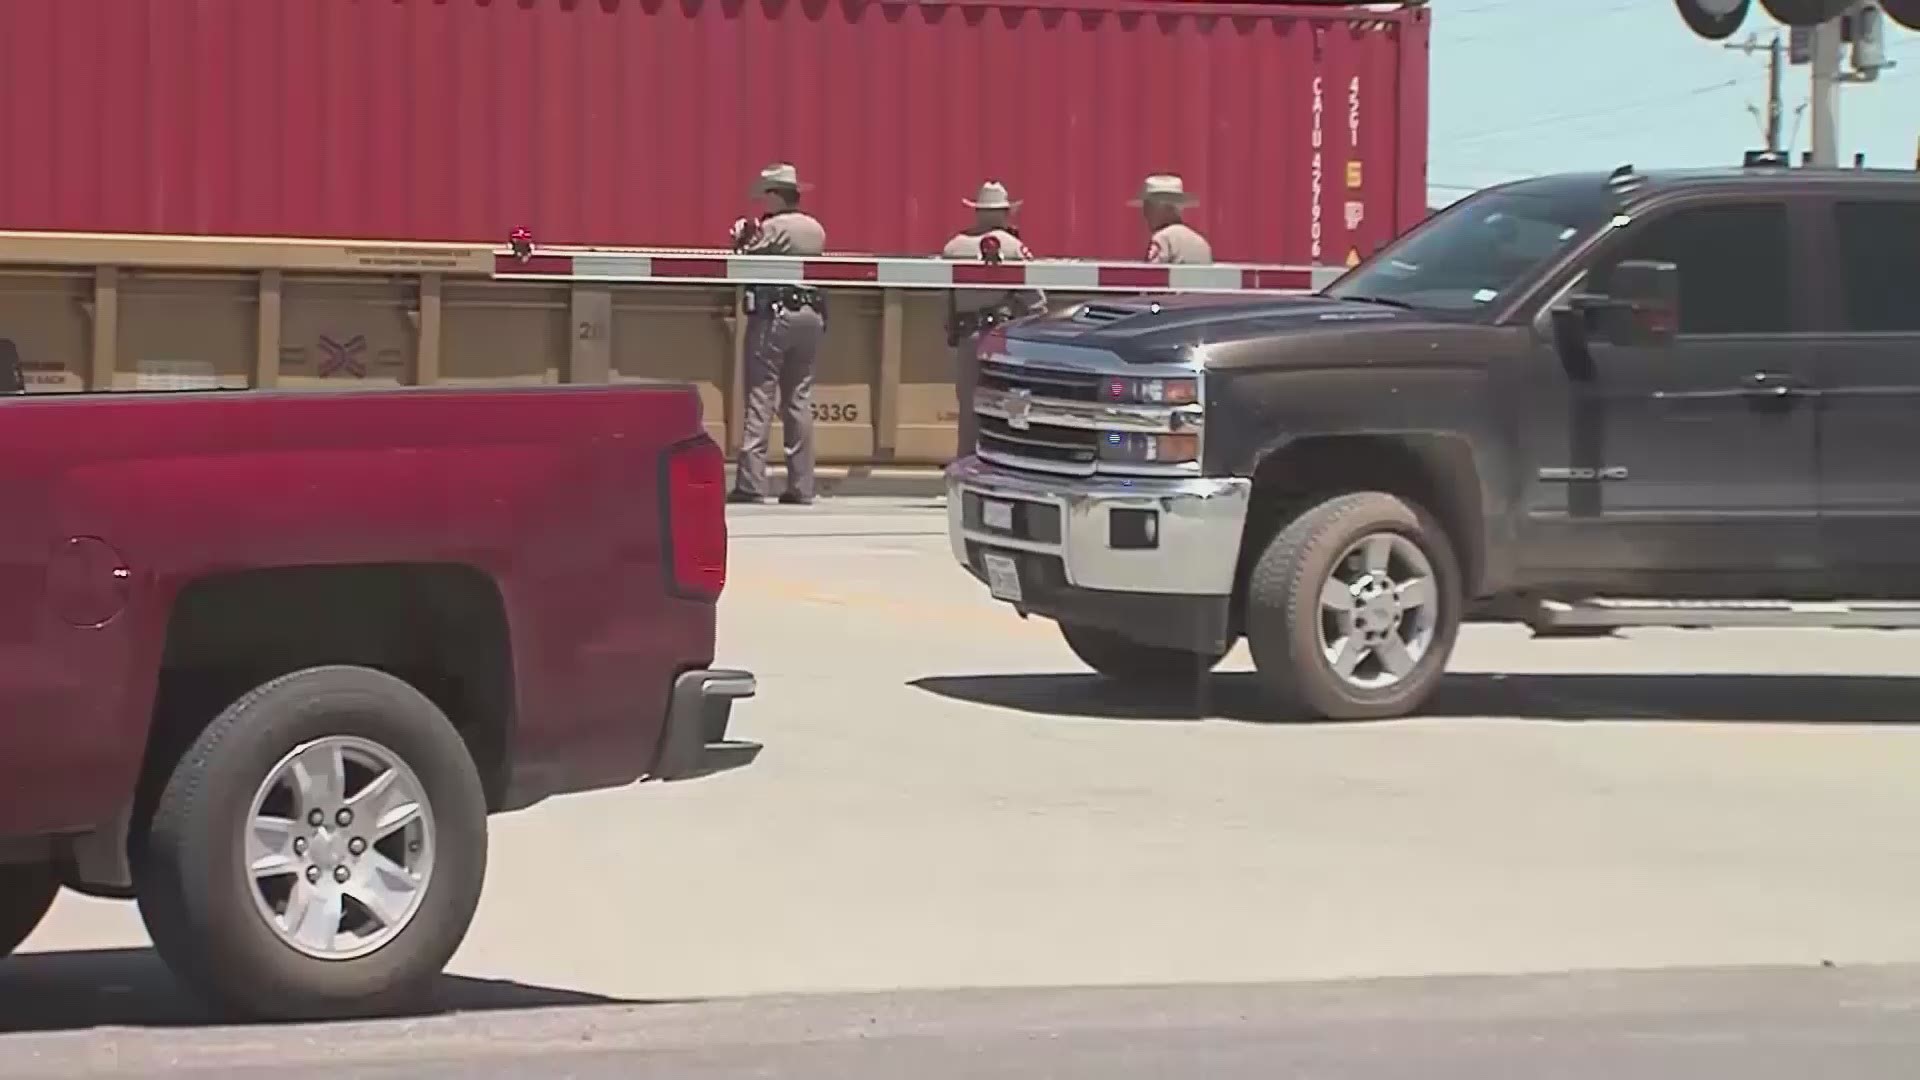 A Texas deputy trying to reach a sick baby was hit by a train. He survived.